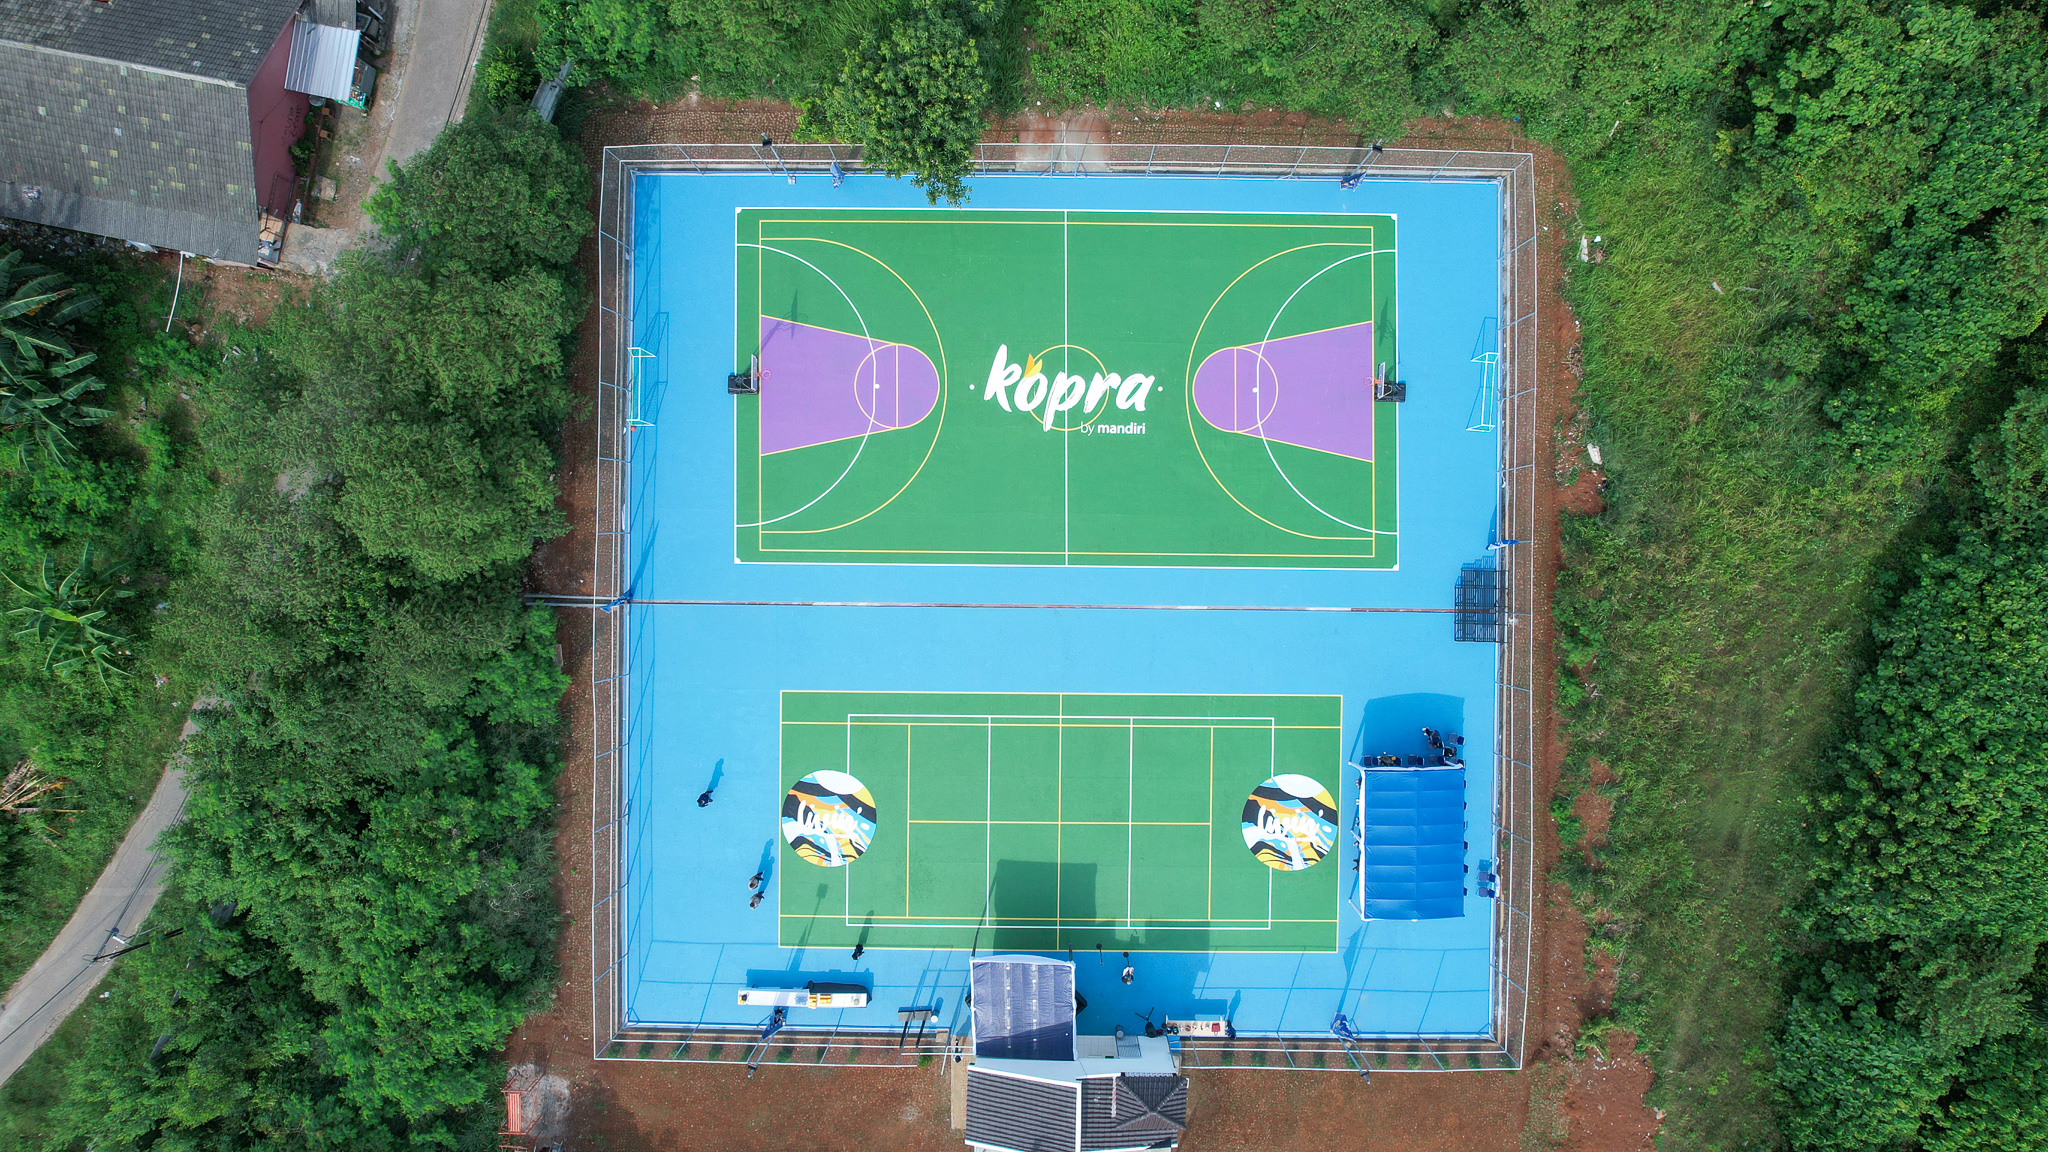 Sports Facility Added: You Can Now Play Tennis at UIII’s Sports Center